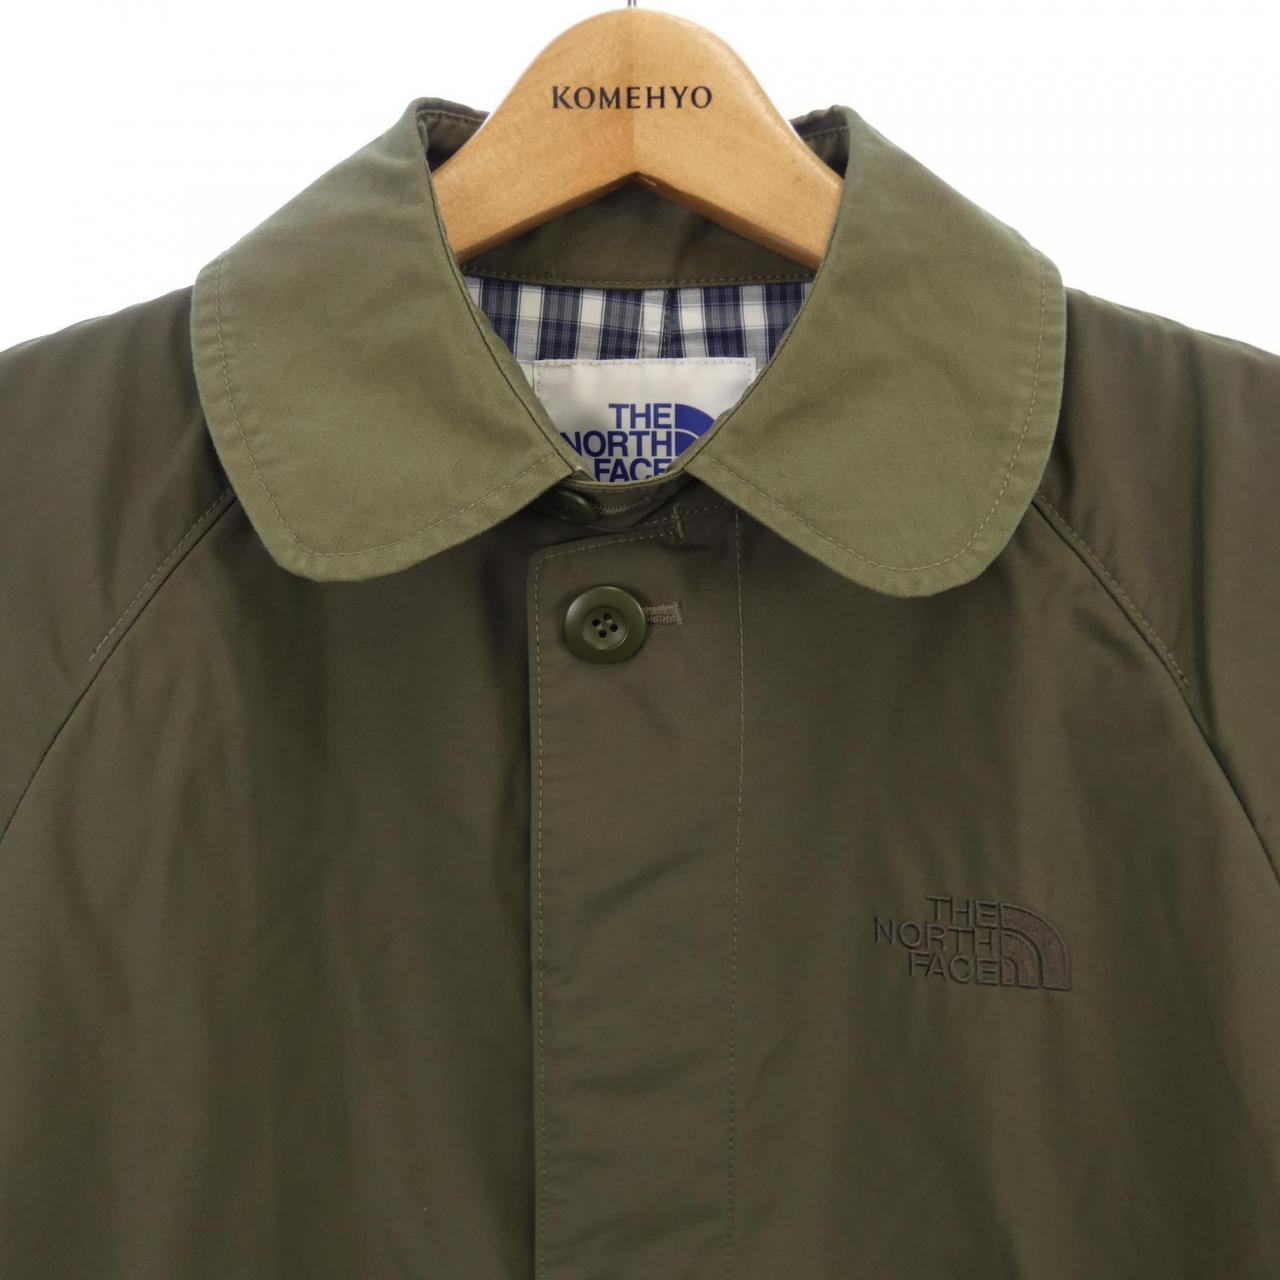 The North Face THE NORTH FACE coat